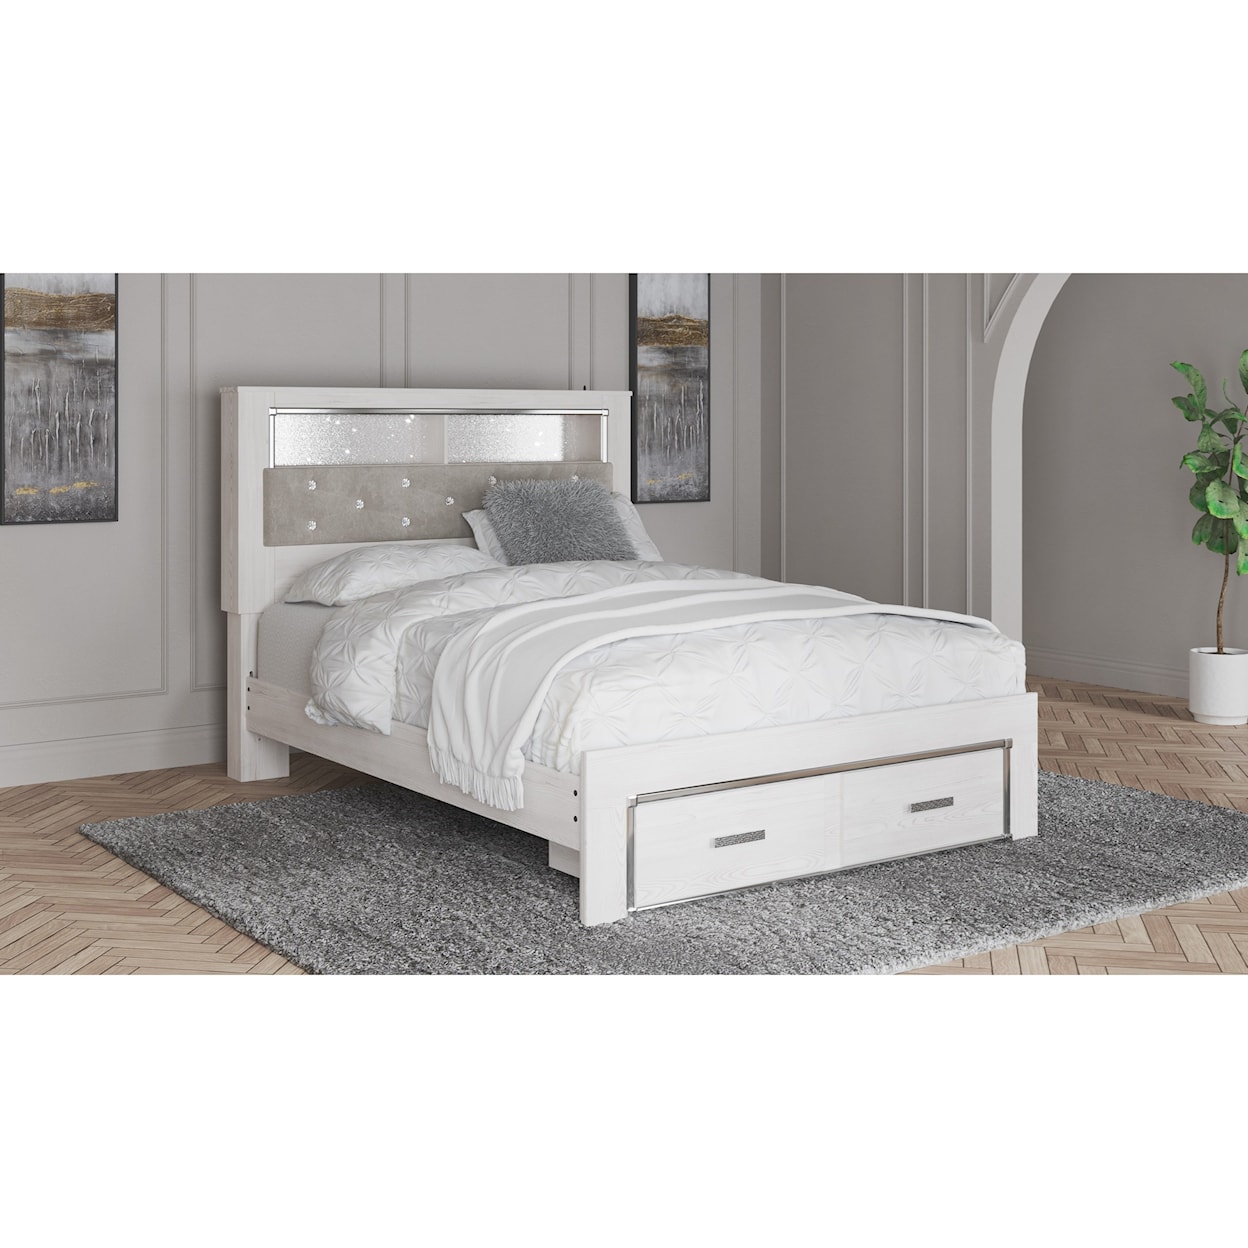 Ashley Furniture Signature Design Altyra Queen Storage Bed with Uph Bookcase Hdbd